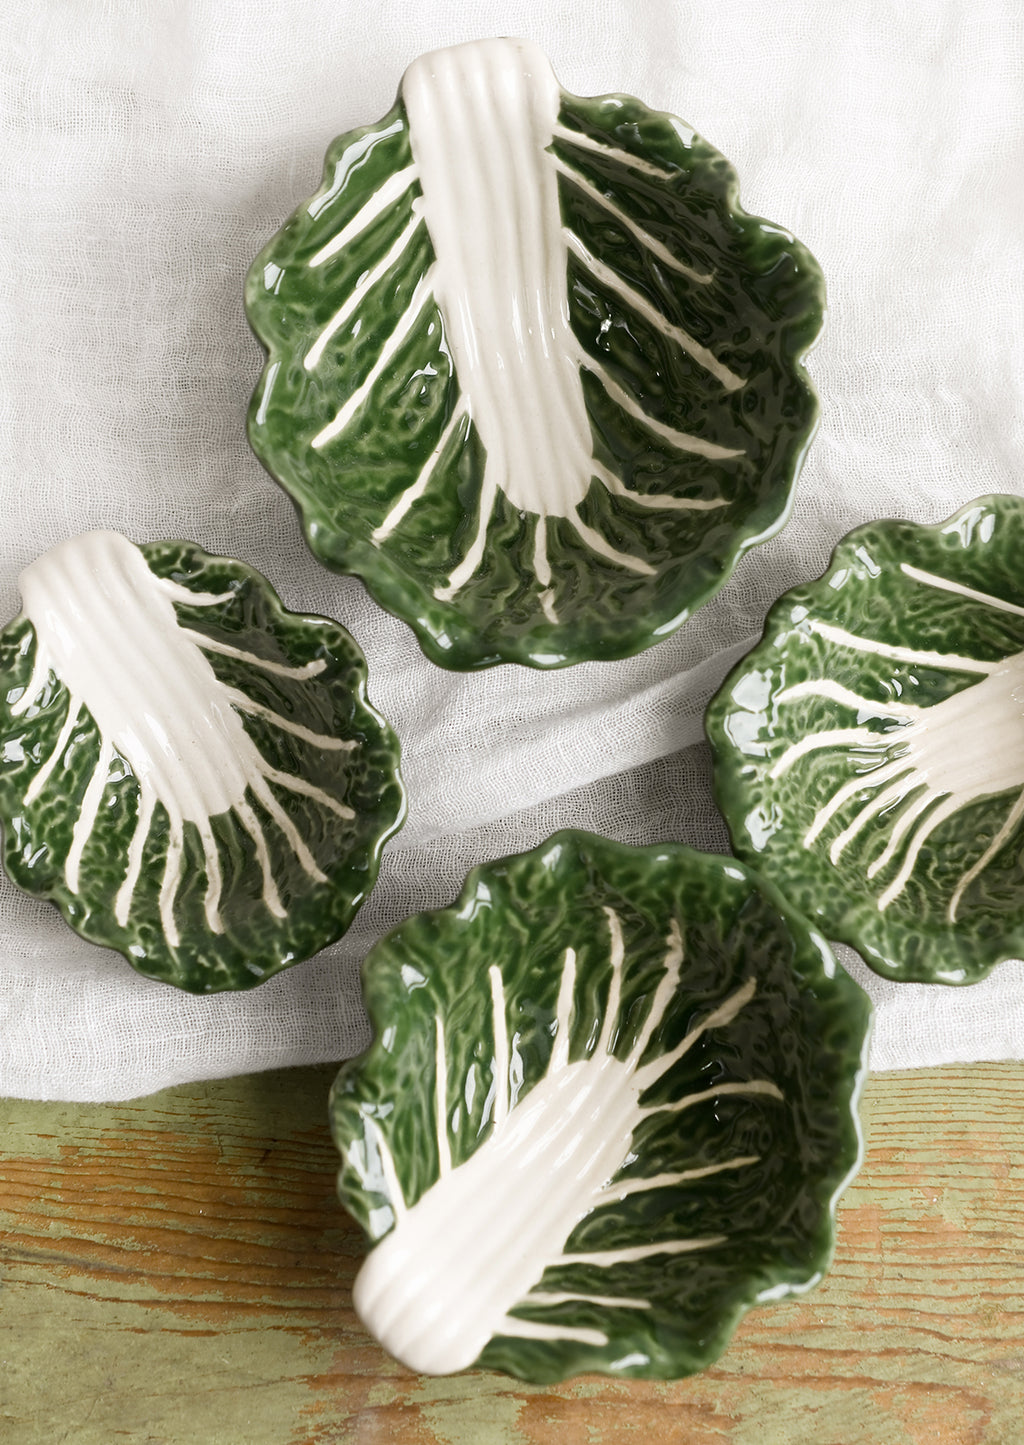 1: Cabbageware style ceramic bowls that look like green cabbage.